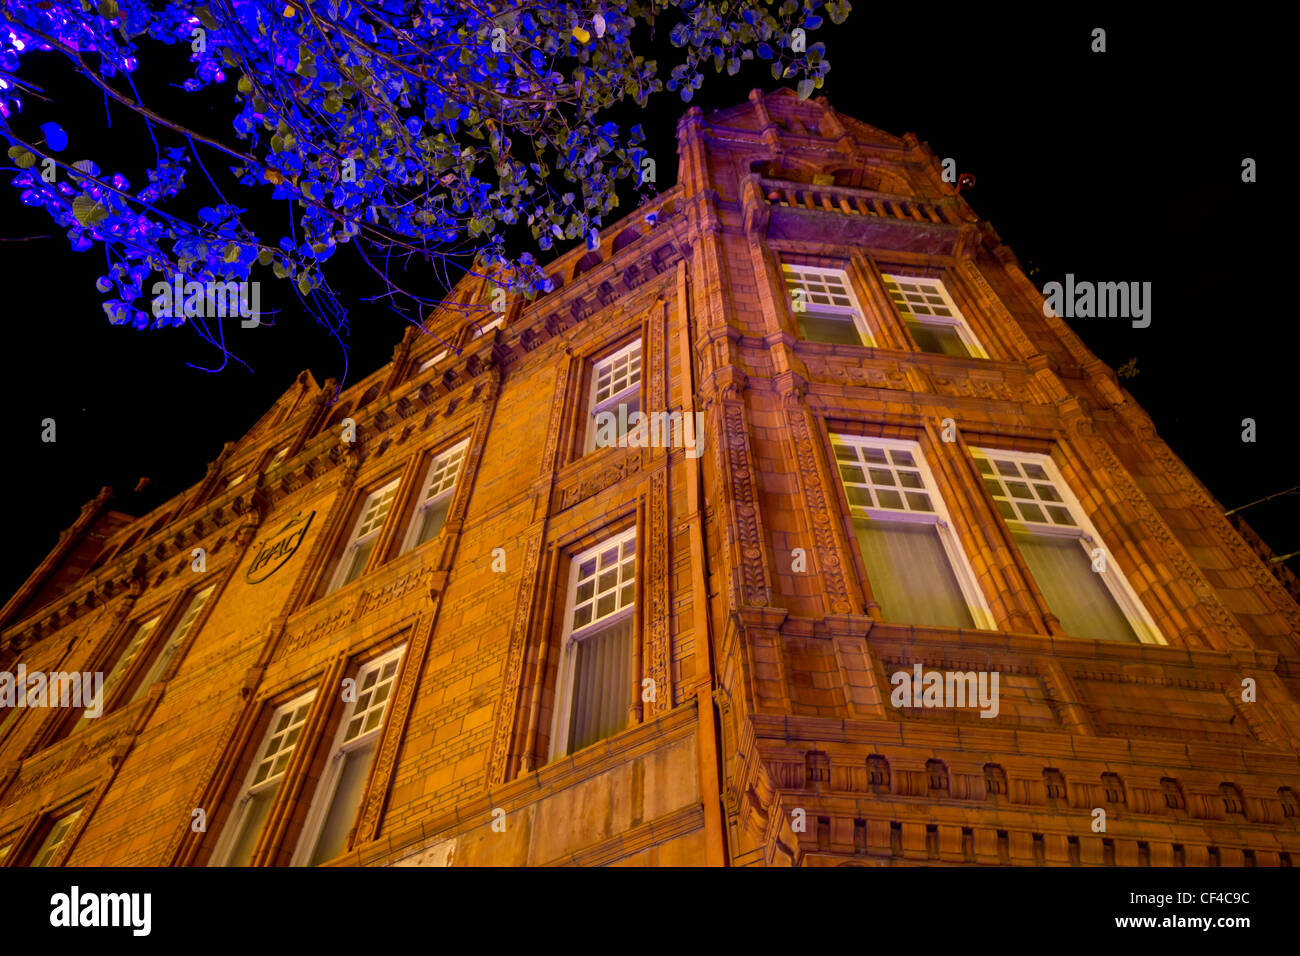 The Co-Operative Bank, Sunbridge Road Bradford, photographed at night. Built in 1985 of red brick and terracotta. Stock Photo